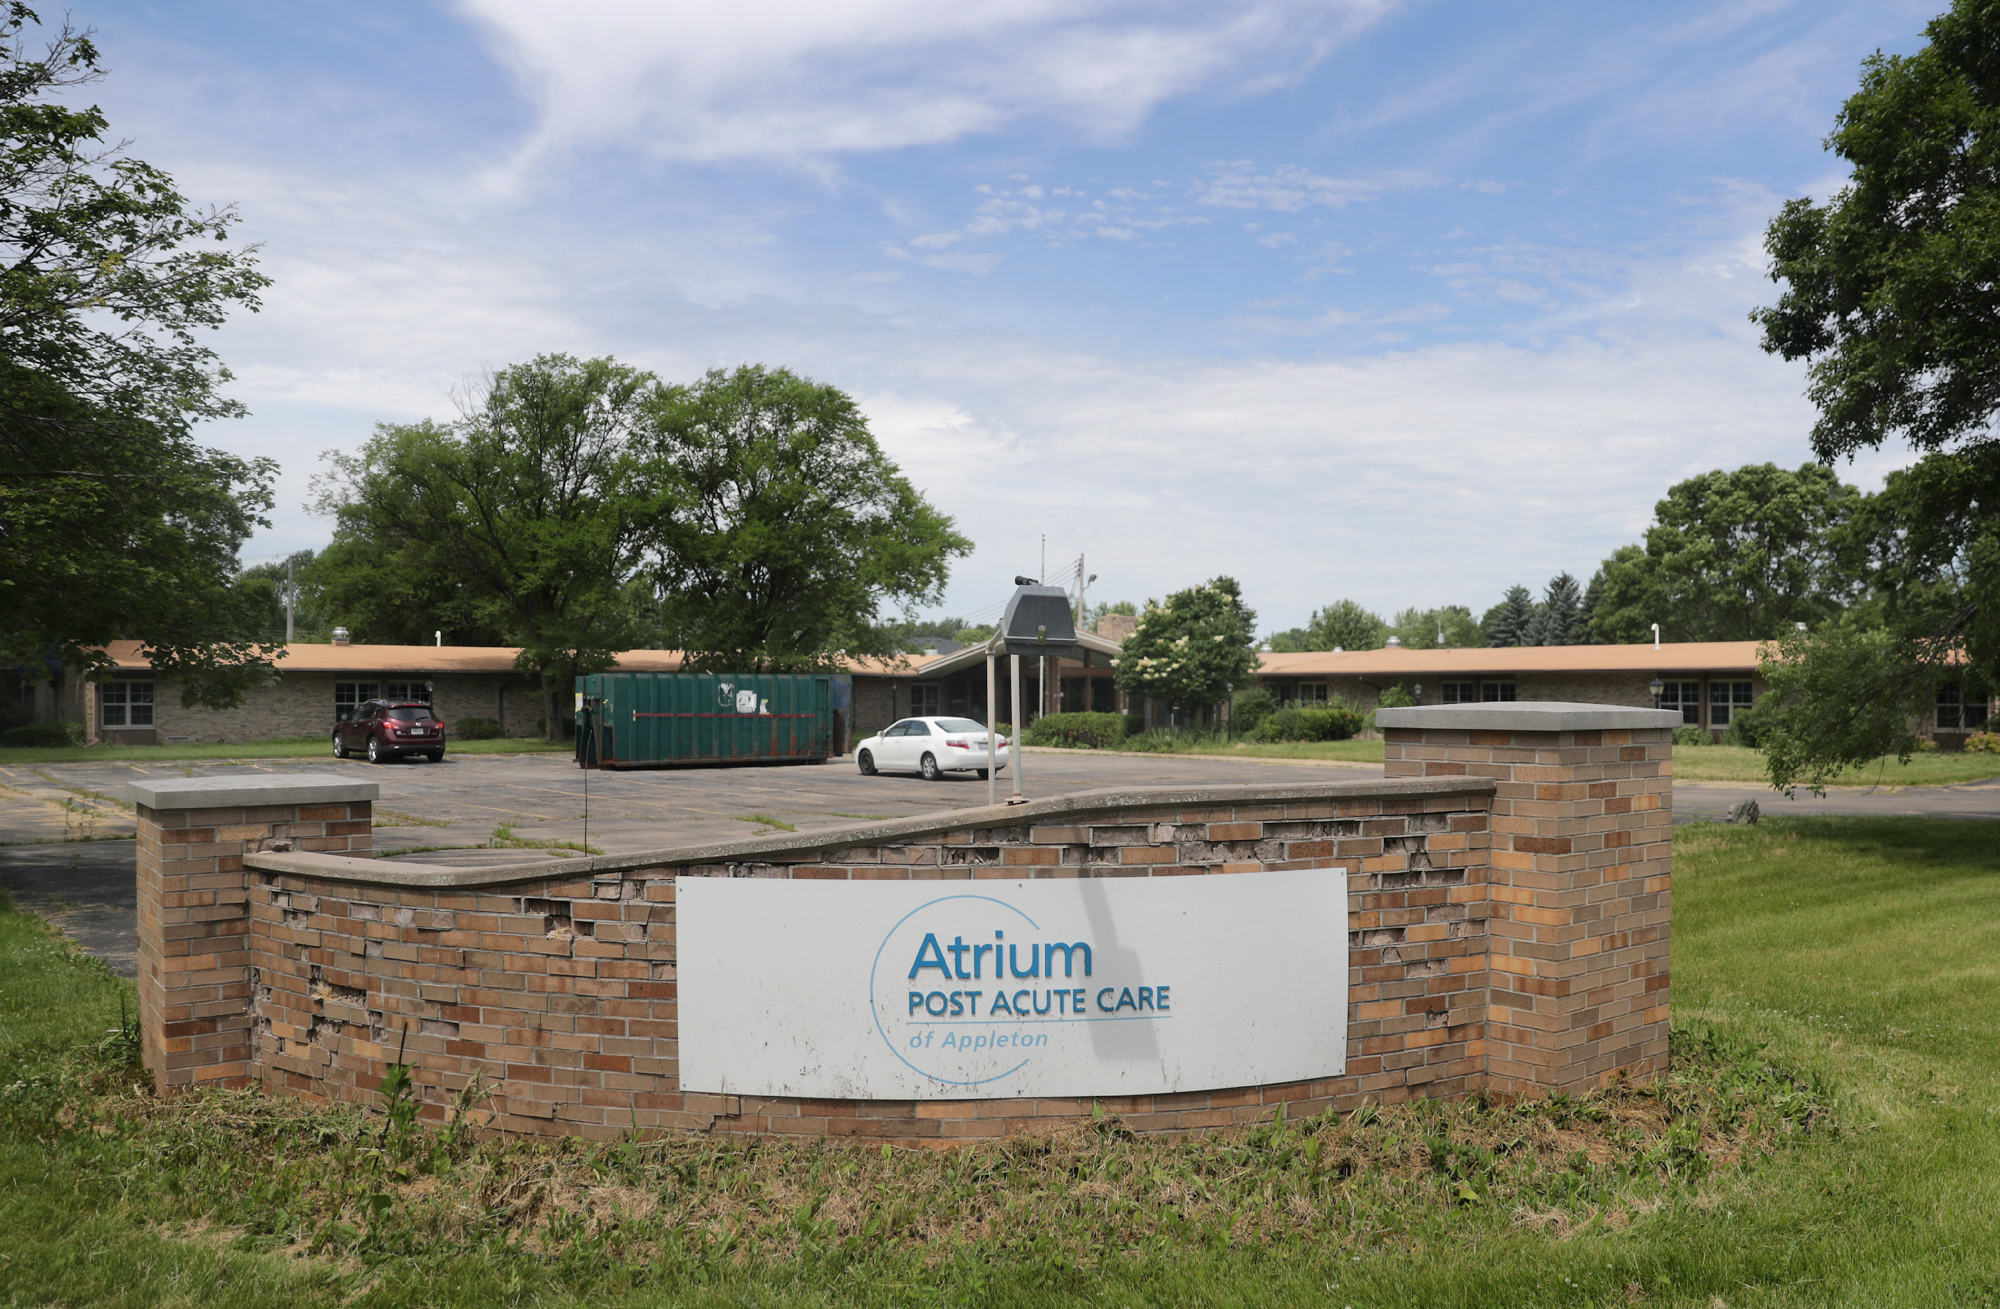 The Atrium facility in Appleton, Wisconsin, is seen in June 2020, after it closed. A federal inspection of the Appleton facility in May 2018 found that the facility didn’t ensure residents received appropriate care to prevent urinary tract infections.